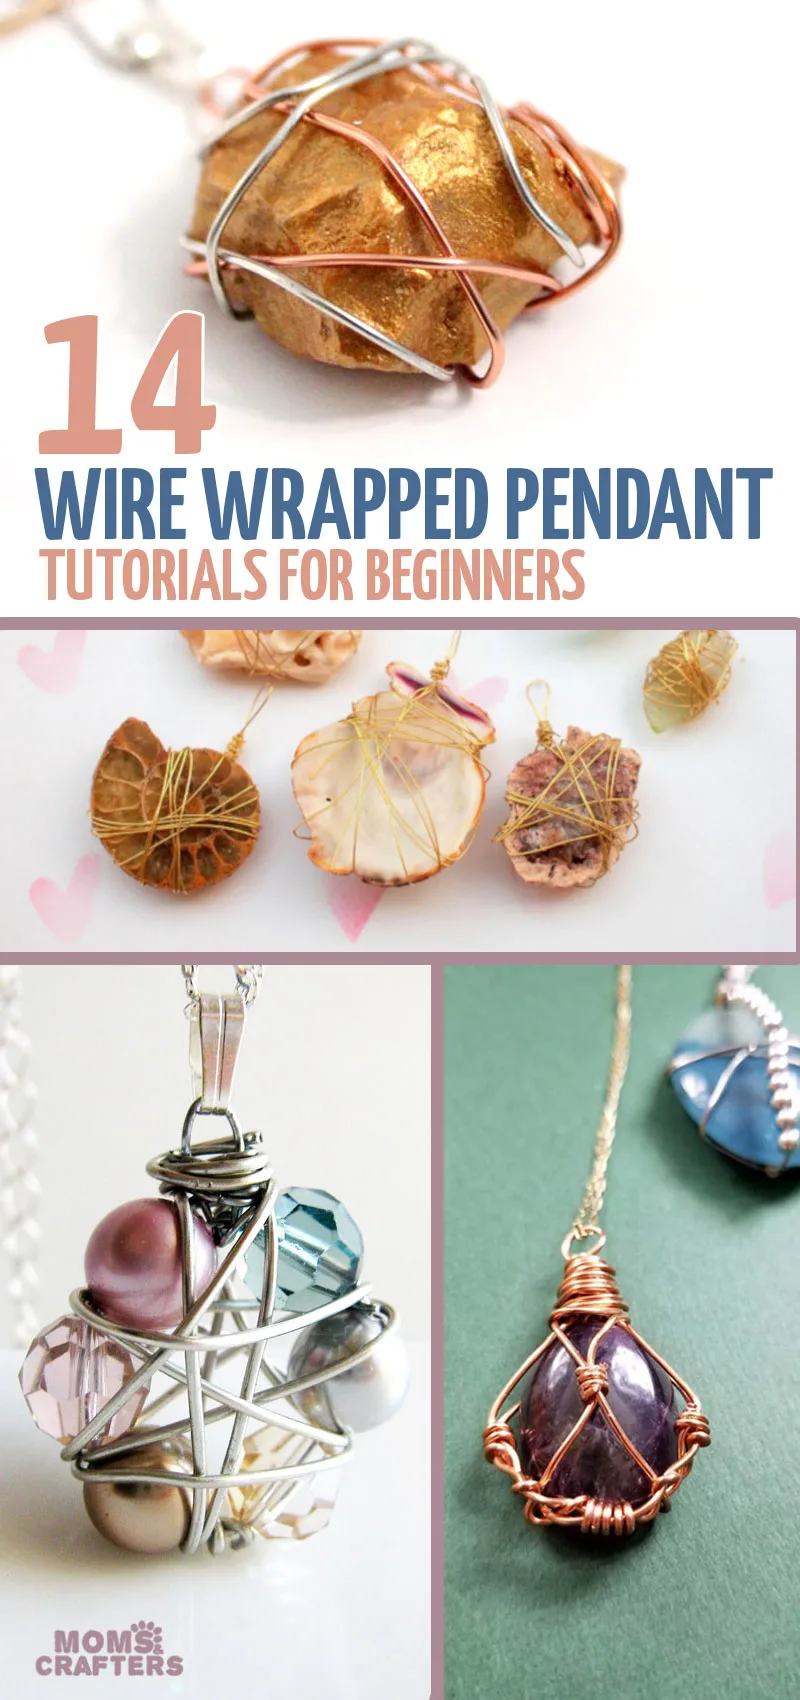 Click to learn how to wire wrap a pendant with 14 cool jewelry making projects for beginners!